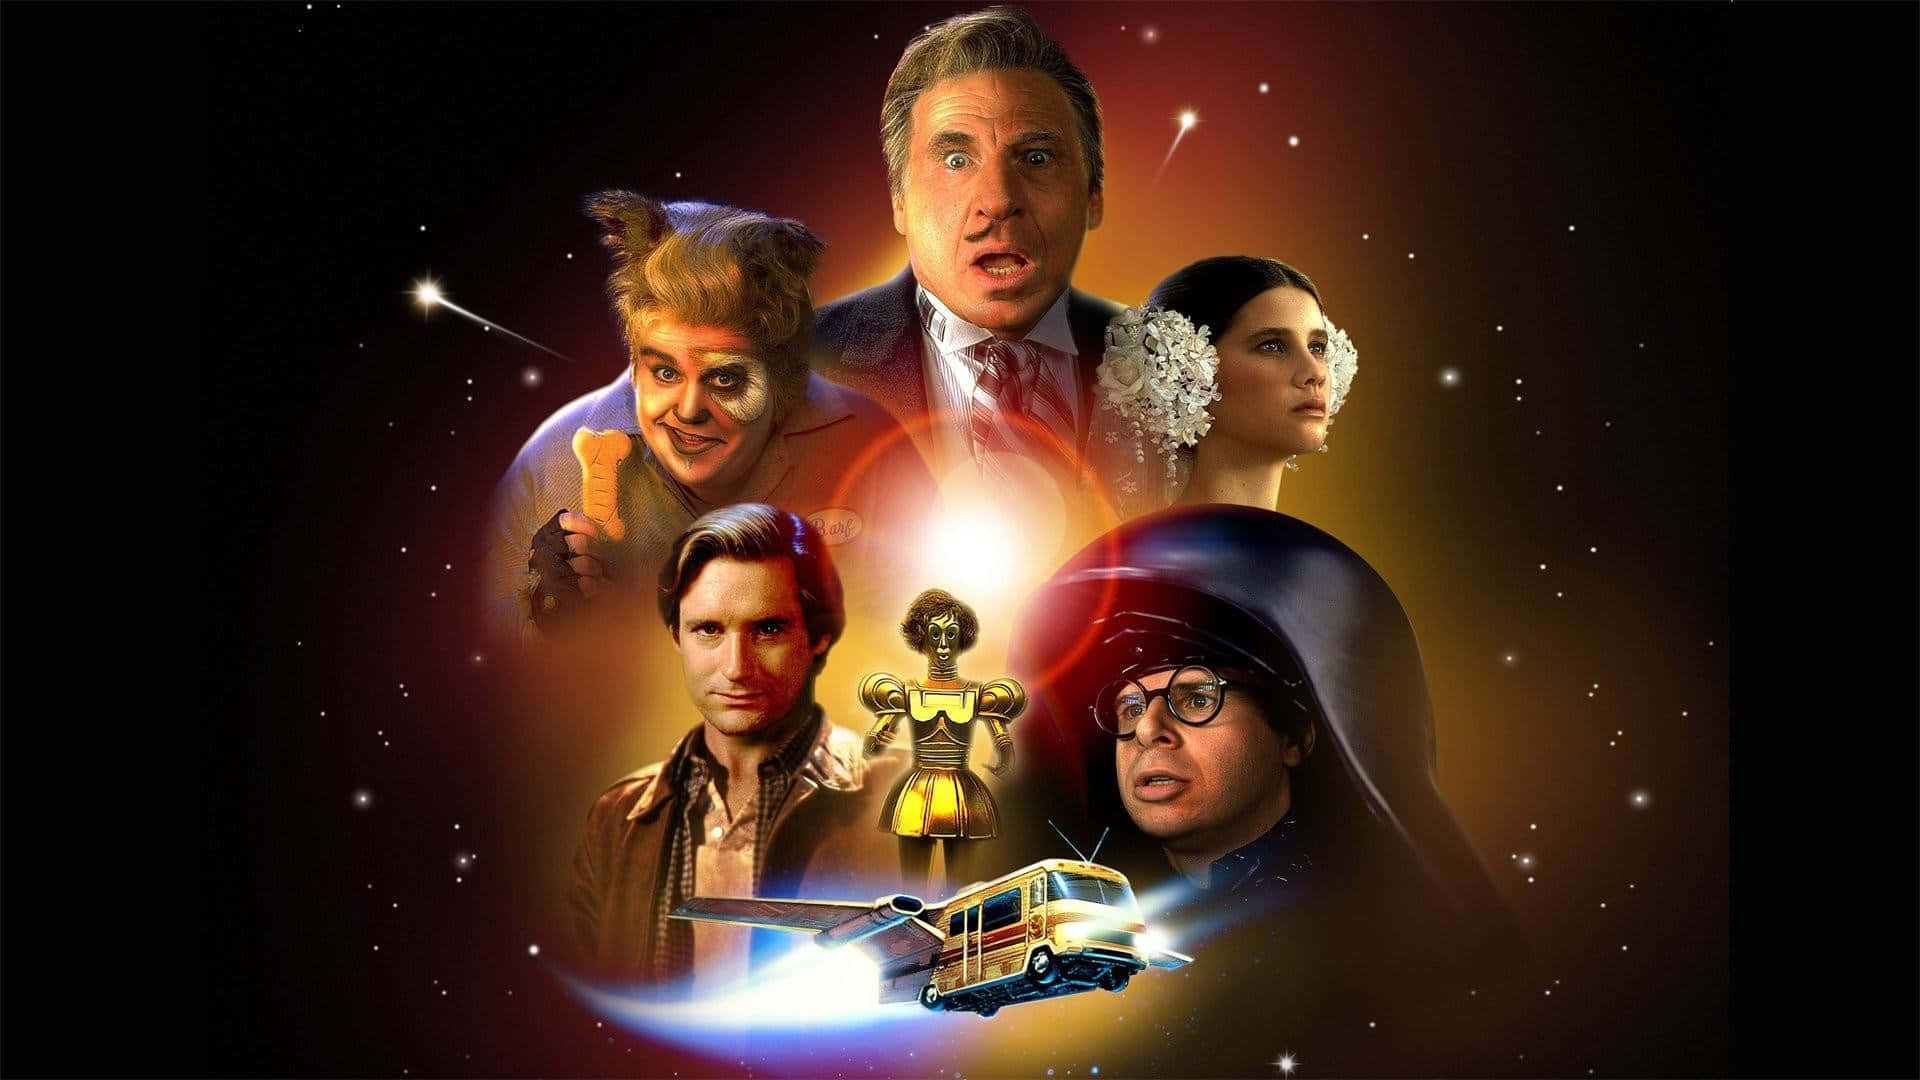 “the Heroes Of Spaceballs On Their Mission To Save Princess Vespa”